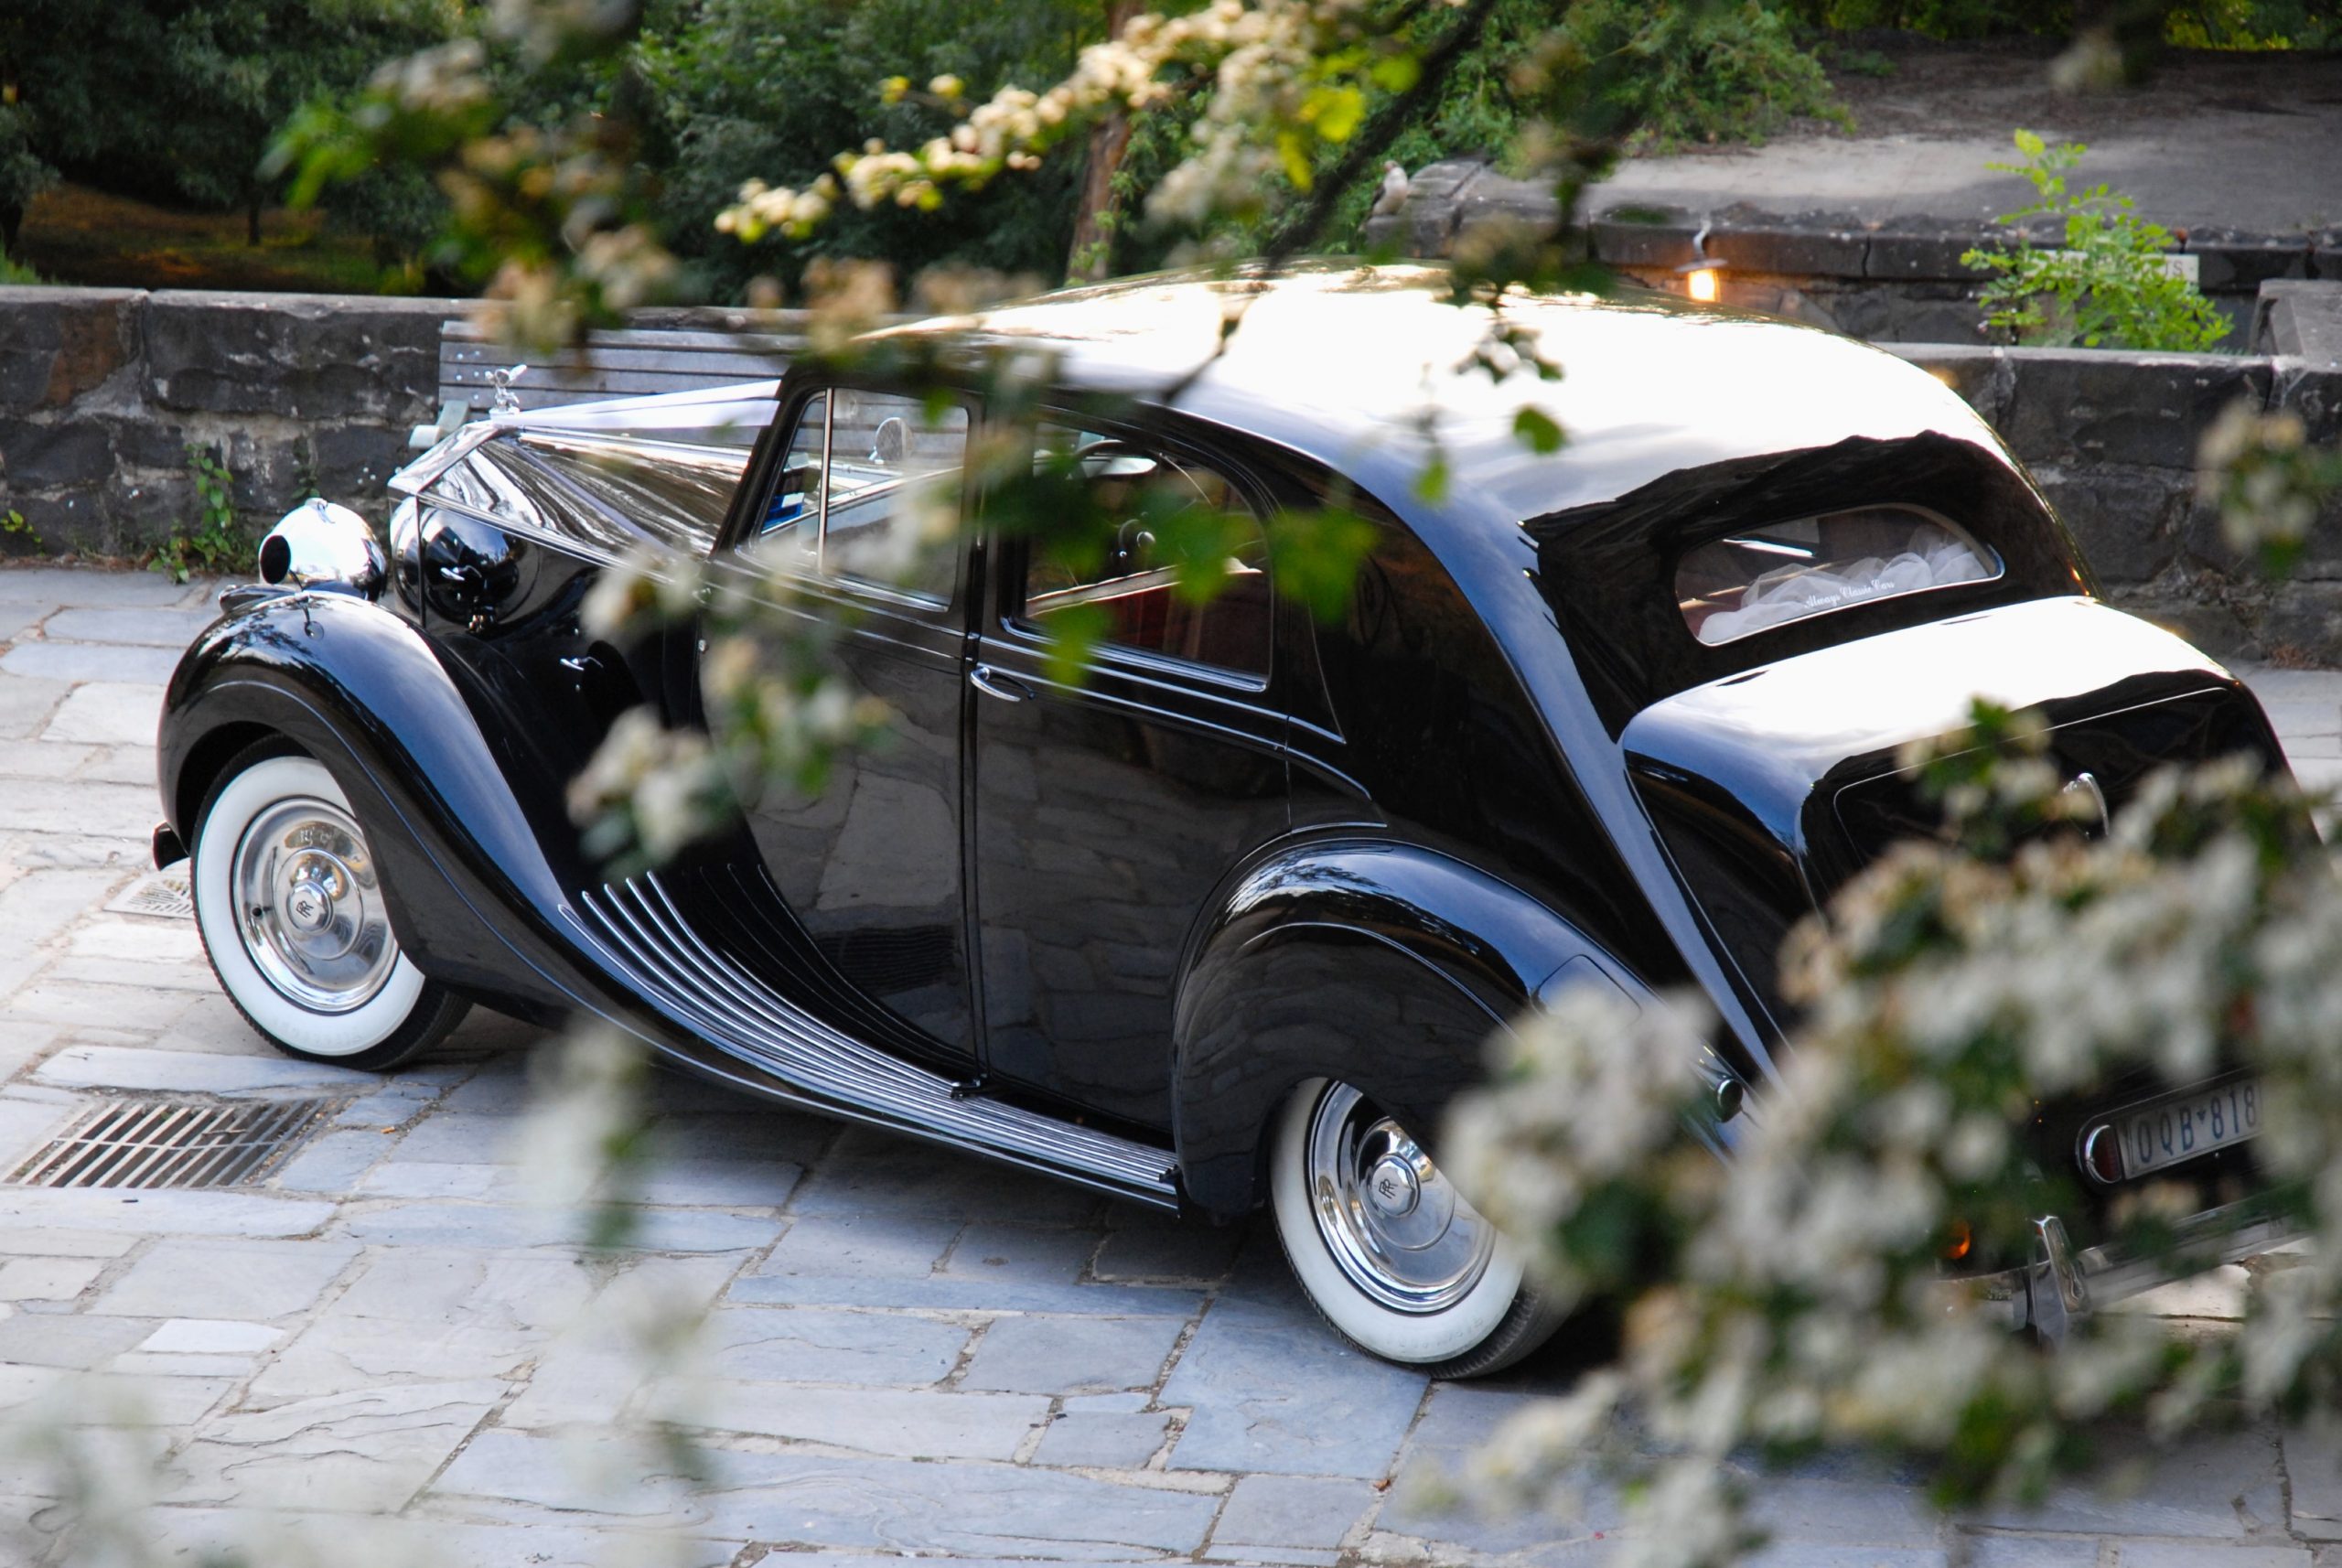 1947 Rolls Royce Wraith with side and rear view